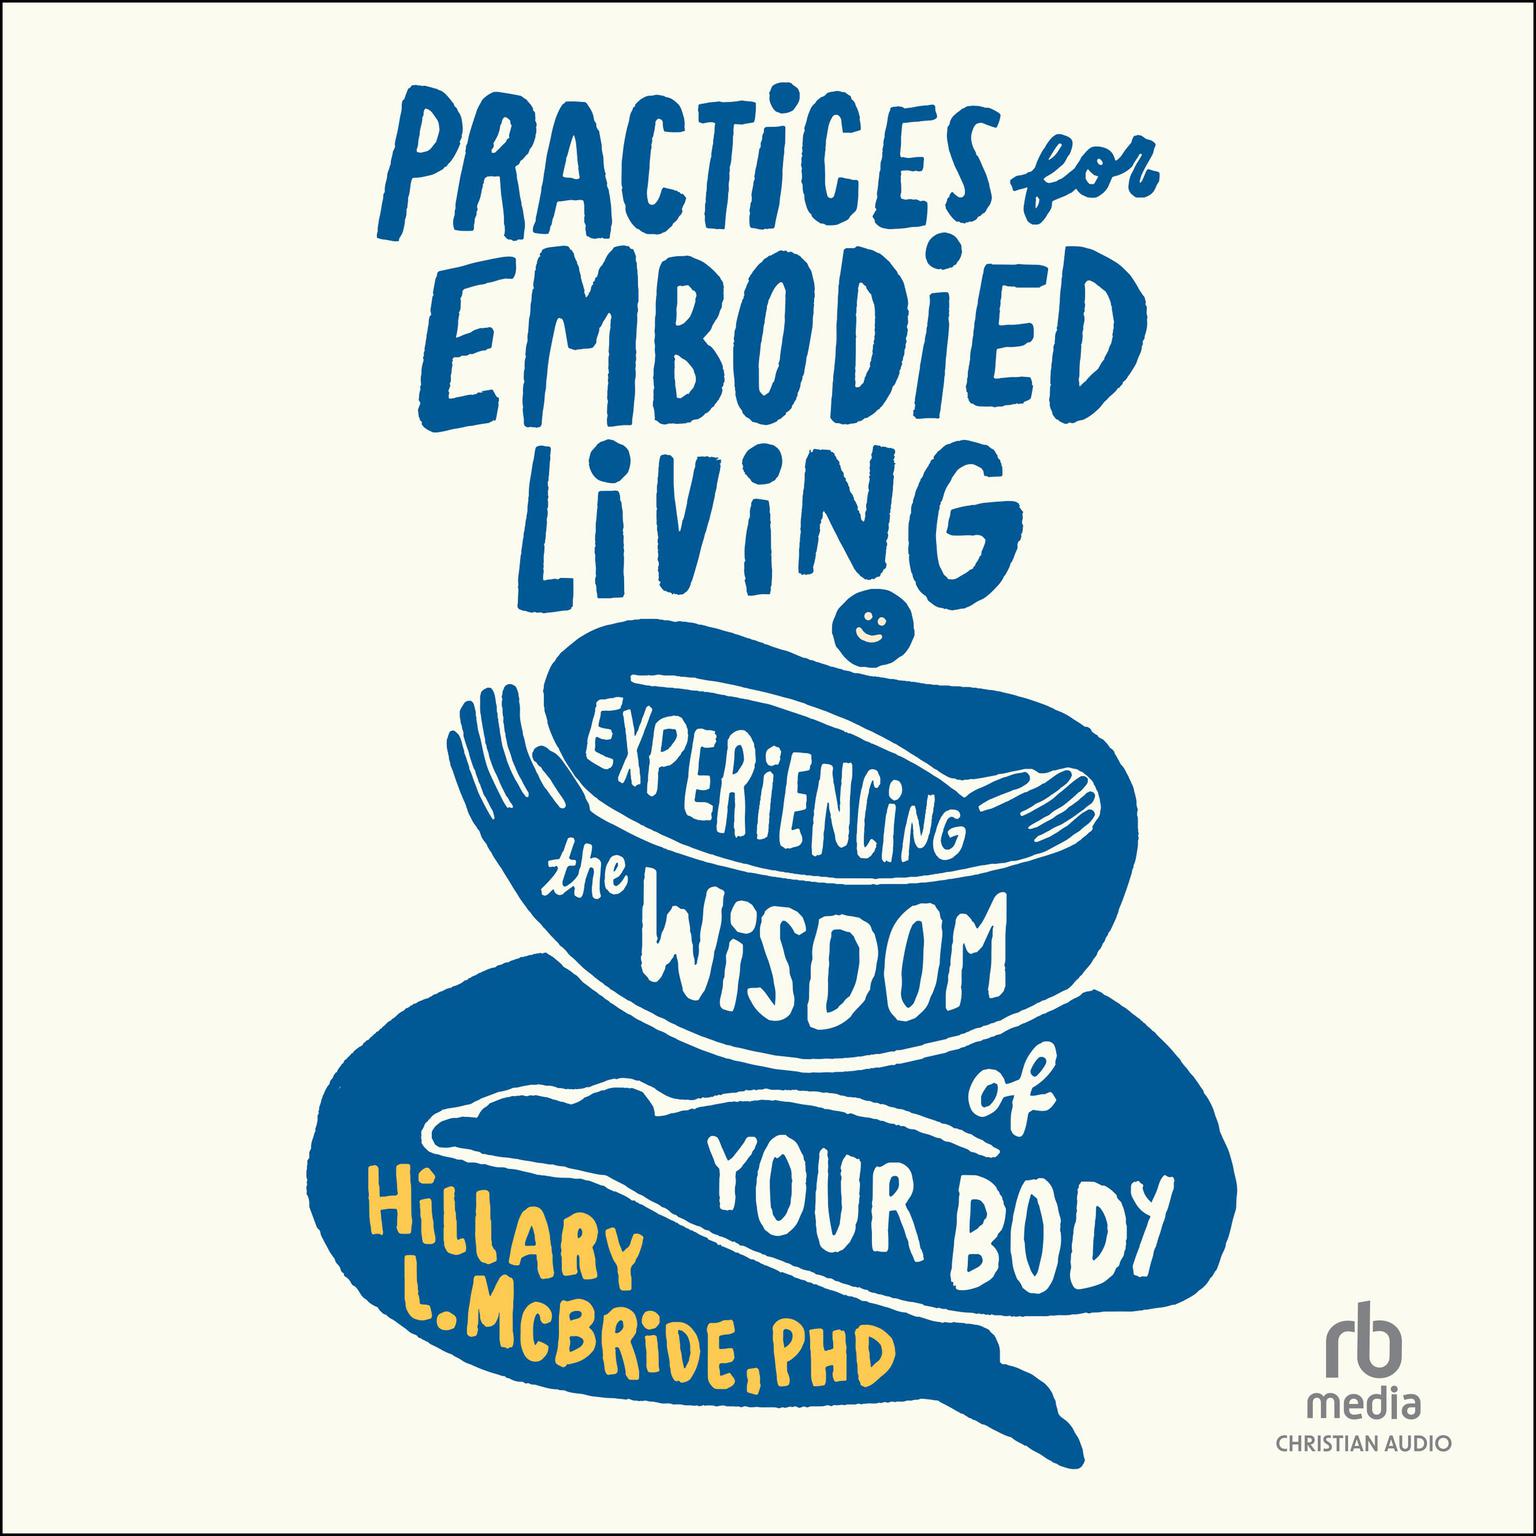 Practices for Embodied Living: Experiencing the Wisdom of Your Body Audiobook, by Hillary L. McBride